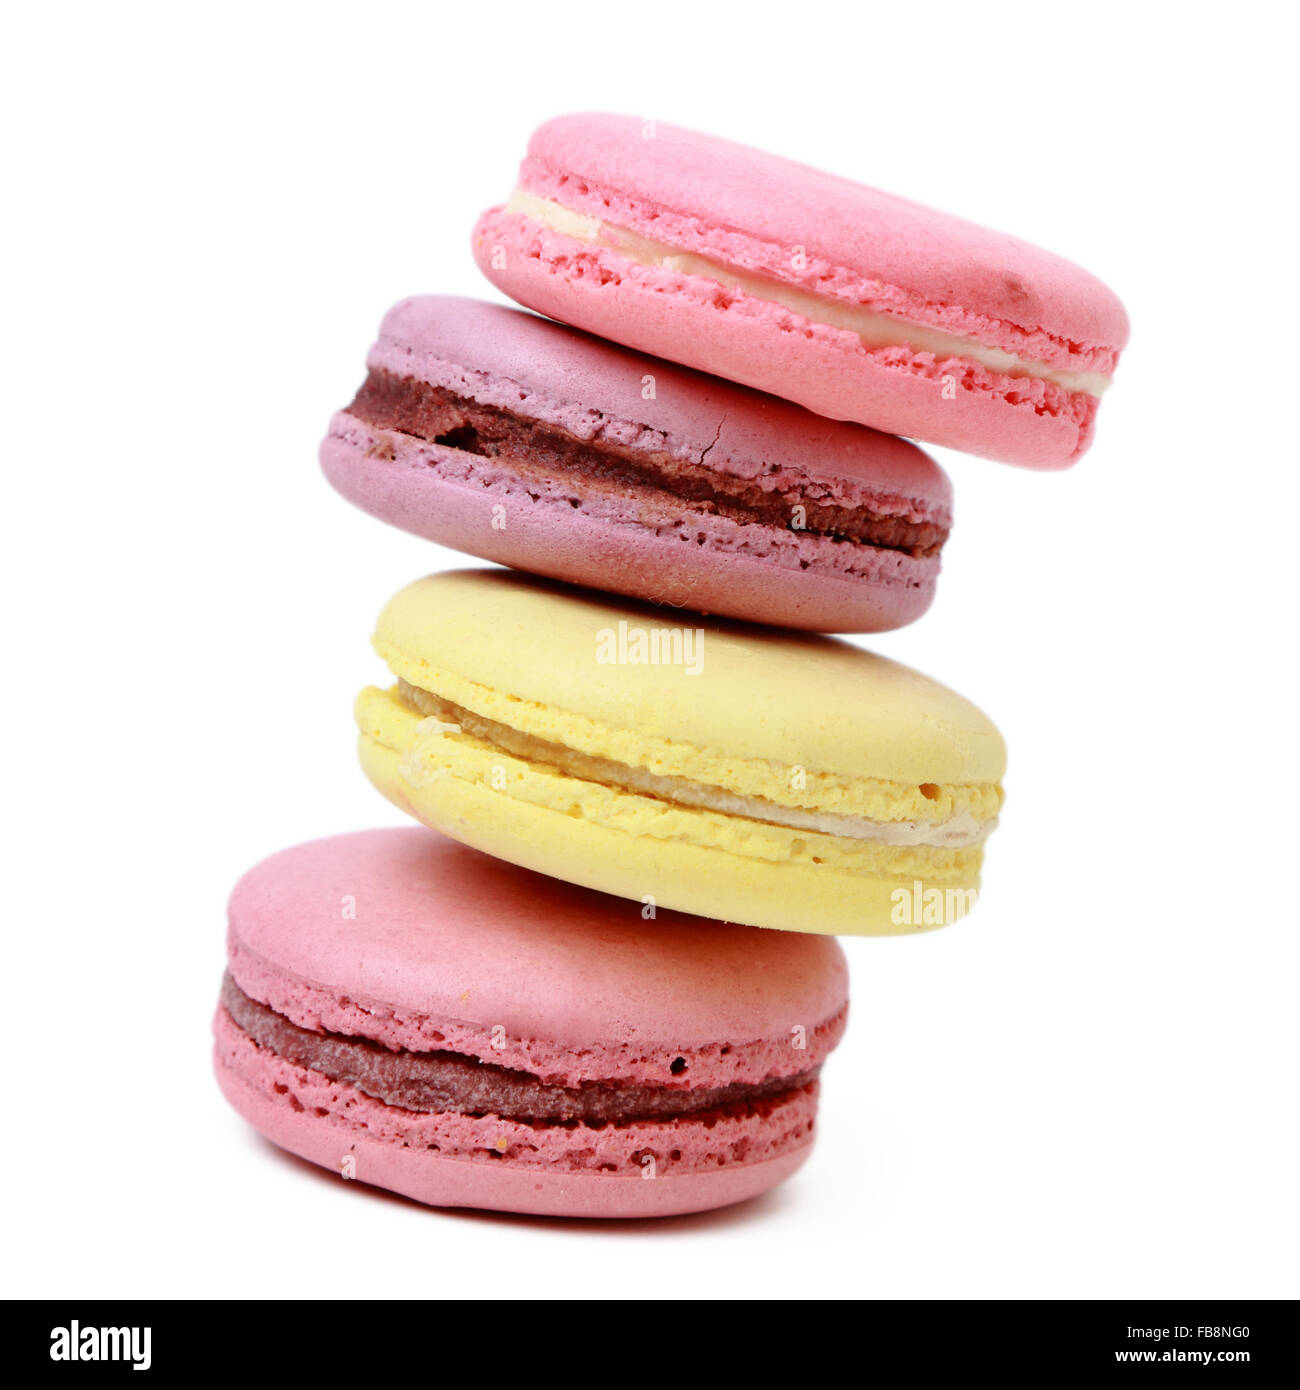 Delicious and colorful French macaroons Stock Photo